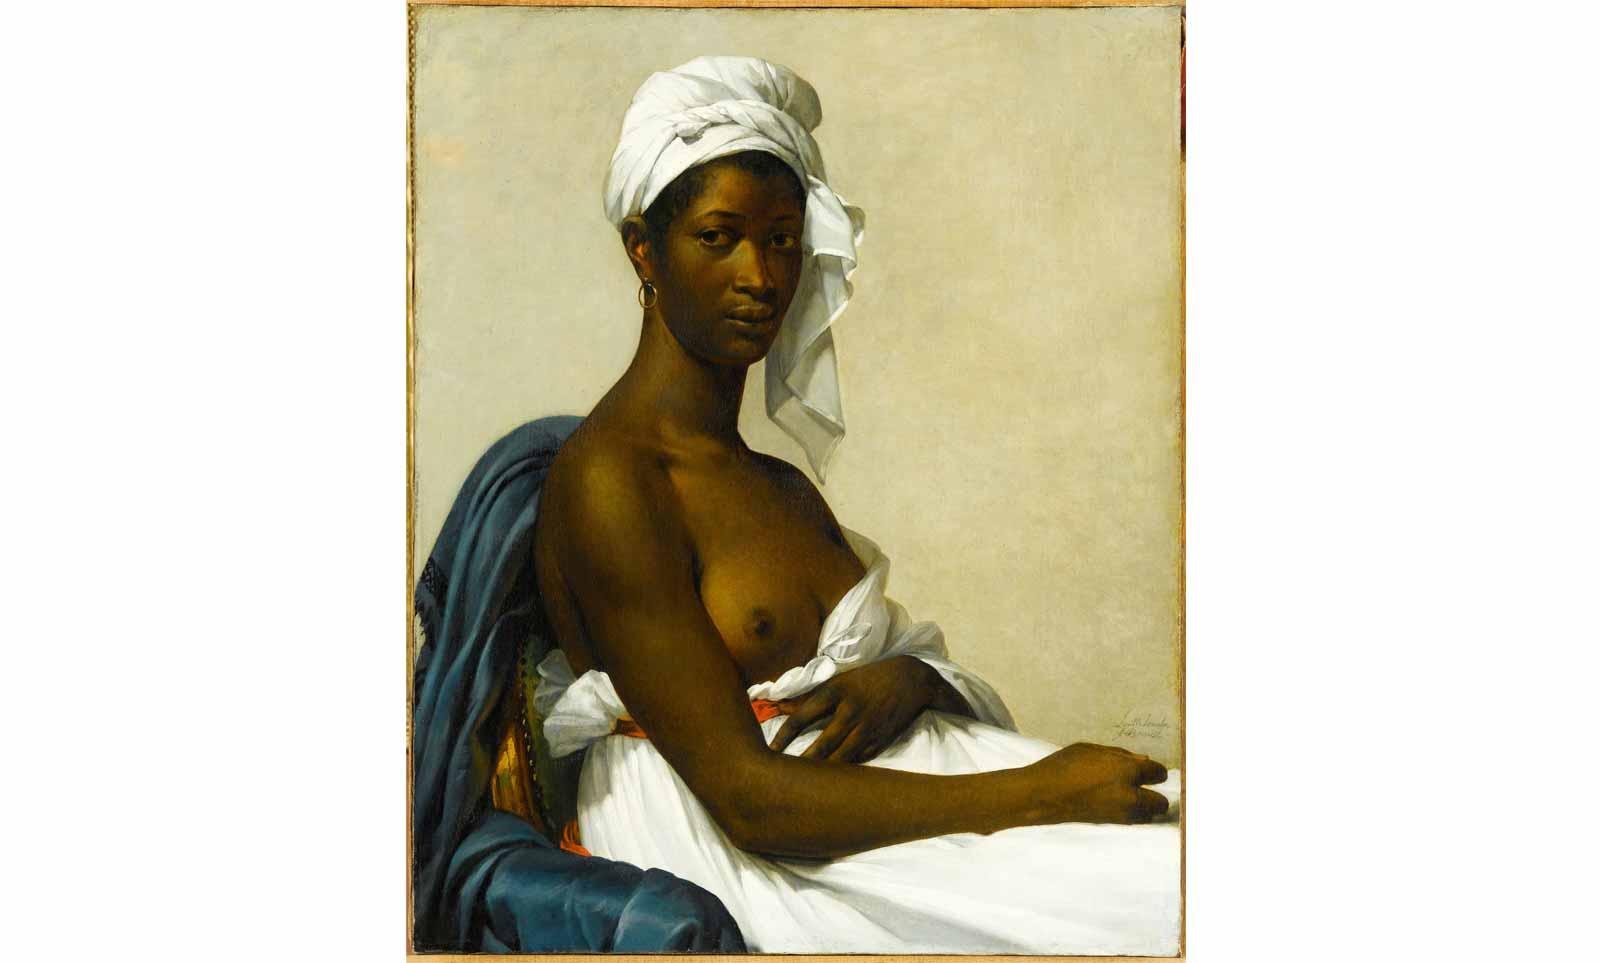 Marie Guillemine Benoist (1768-1826), Portrait of Madeleine, 1800. Also called Portrait of a black woman, presented at the Salon of 1800 under the title Portrait of a Negress